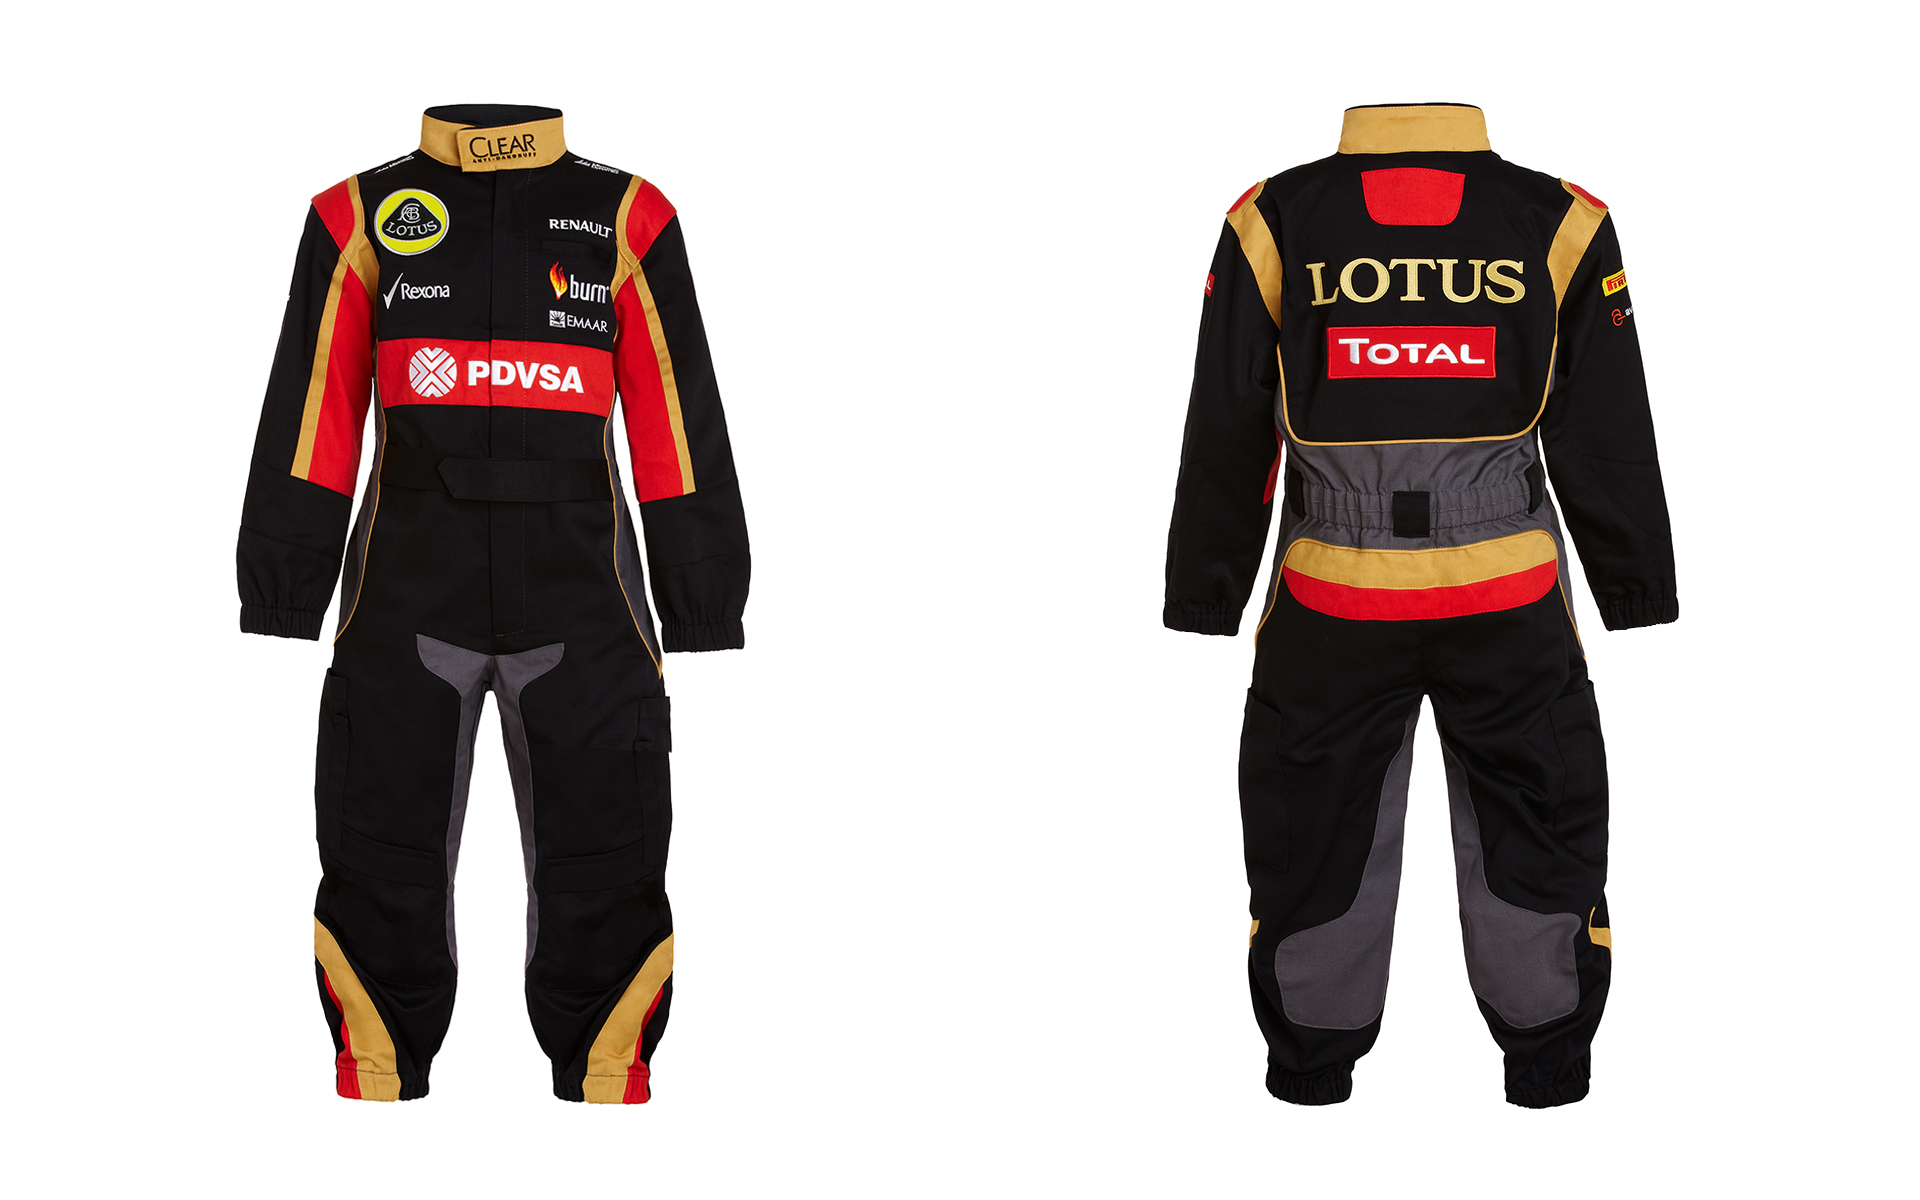 Lotus f1 racing suite front and back invisible mannequin e-commerce photo shoot